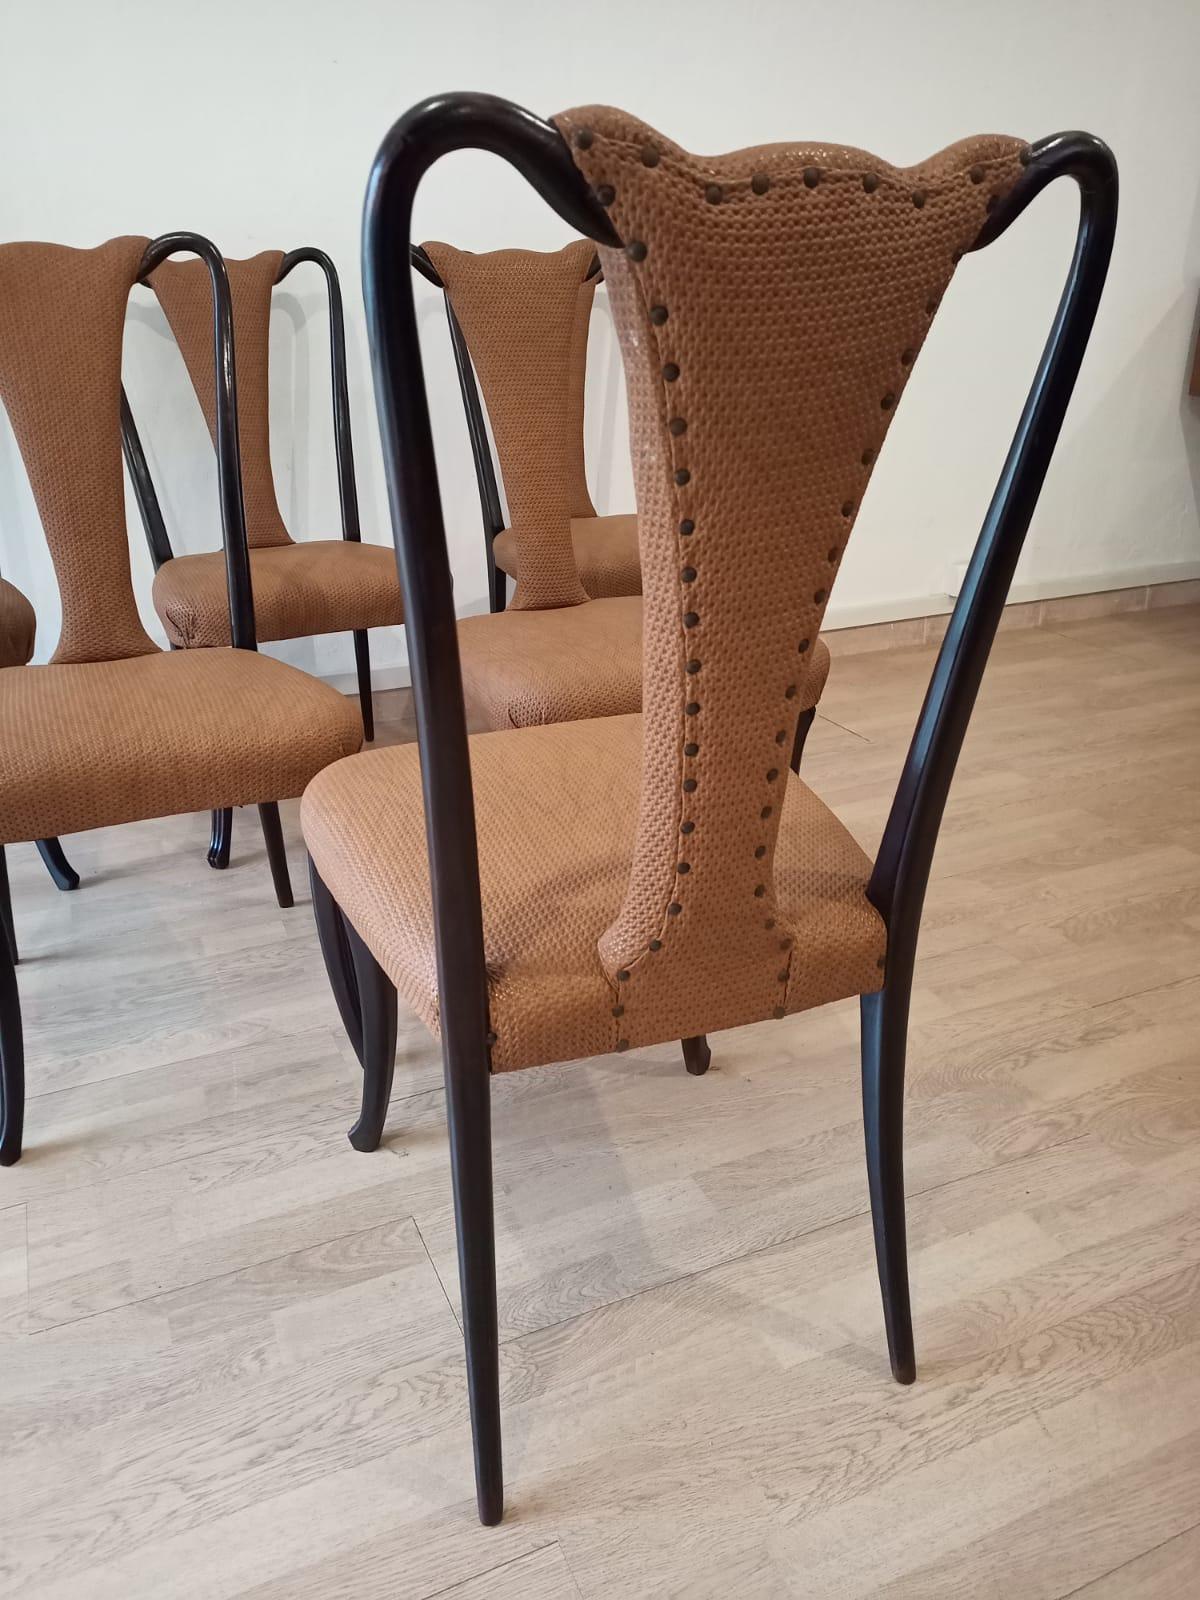 Six Mid 20th Century Vittorio Dassi Chairs Mid-Century Modern Leather Classical In Excellent Condition For Sale In Sant'Arsenio, Campania